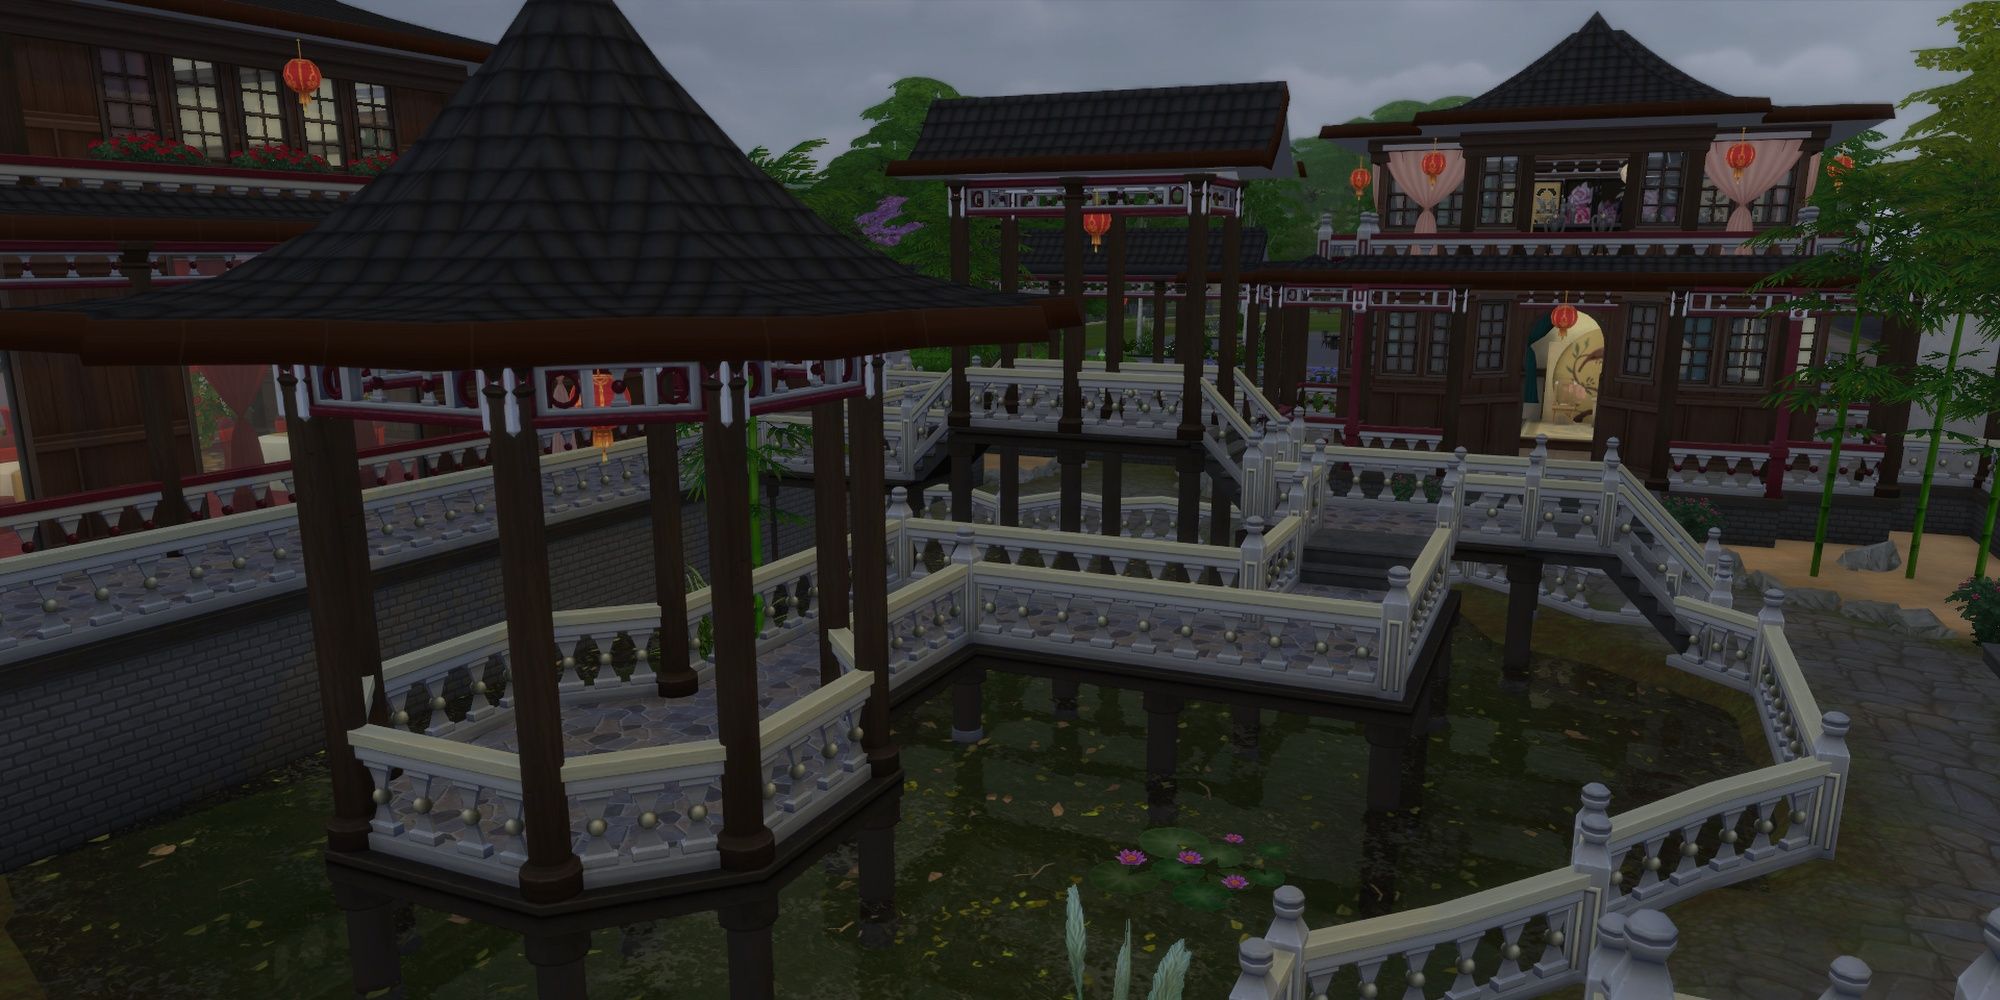 An east asian courtyard in The Sims 4 with a gazebo over a pond.